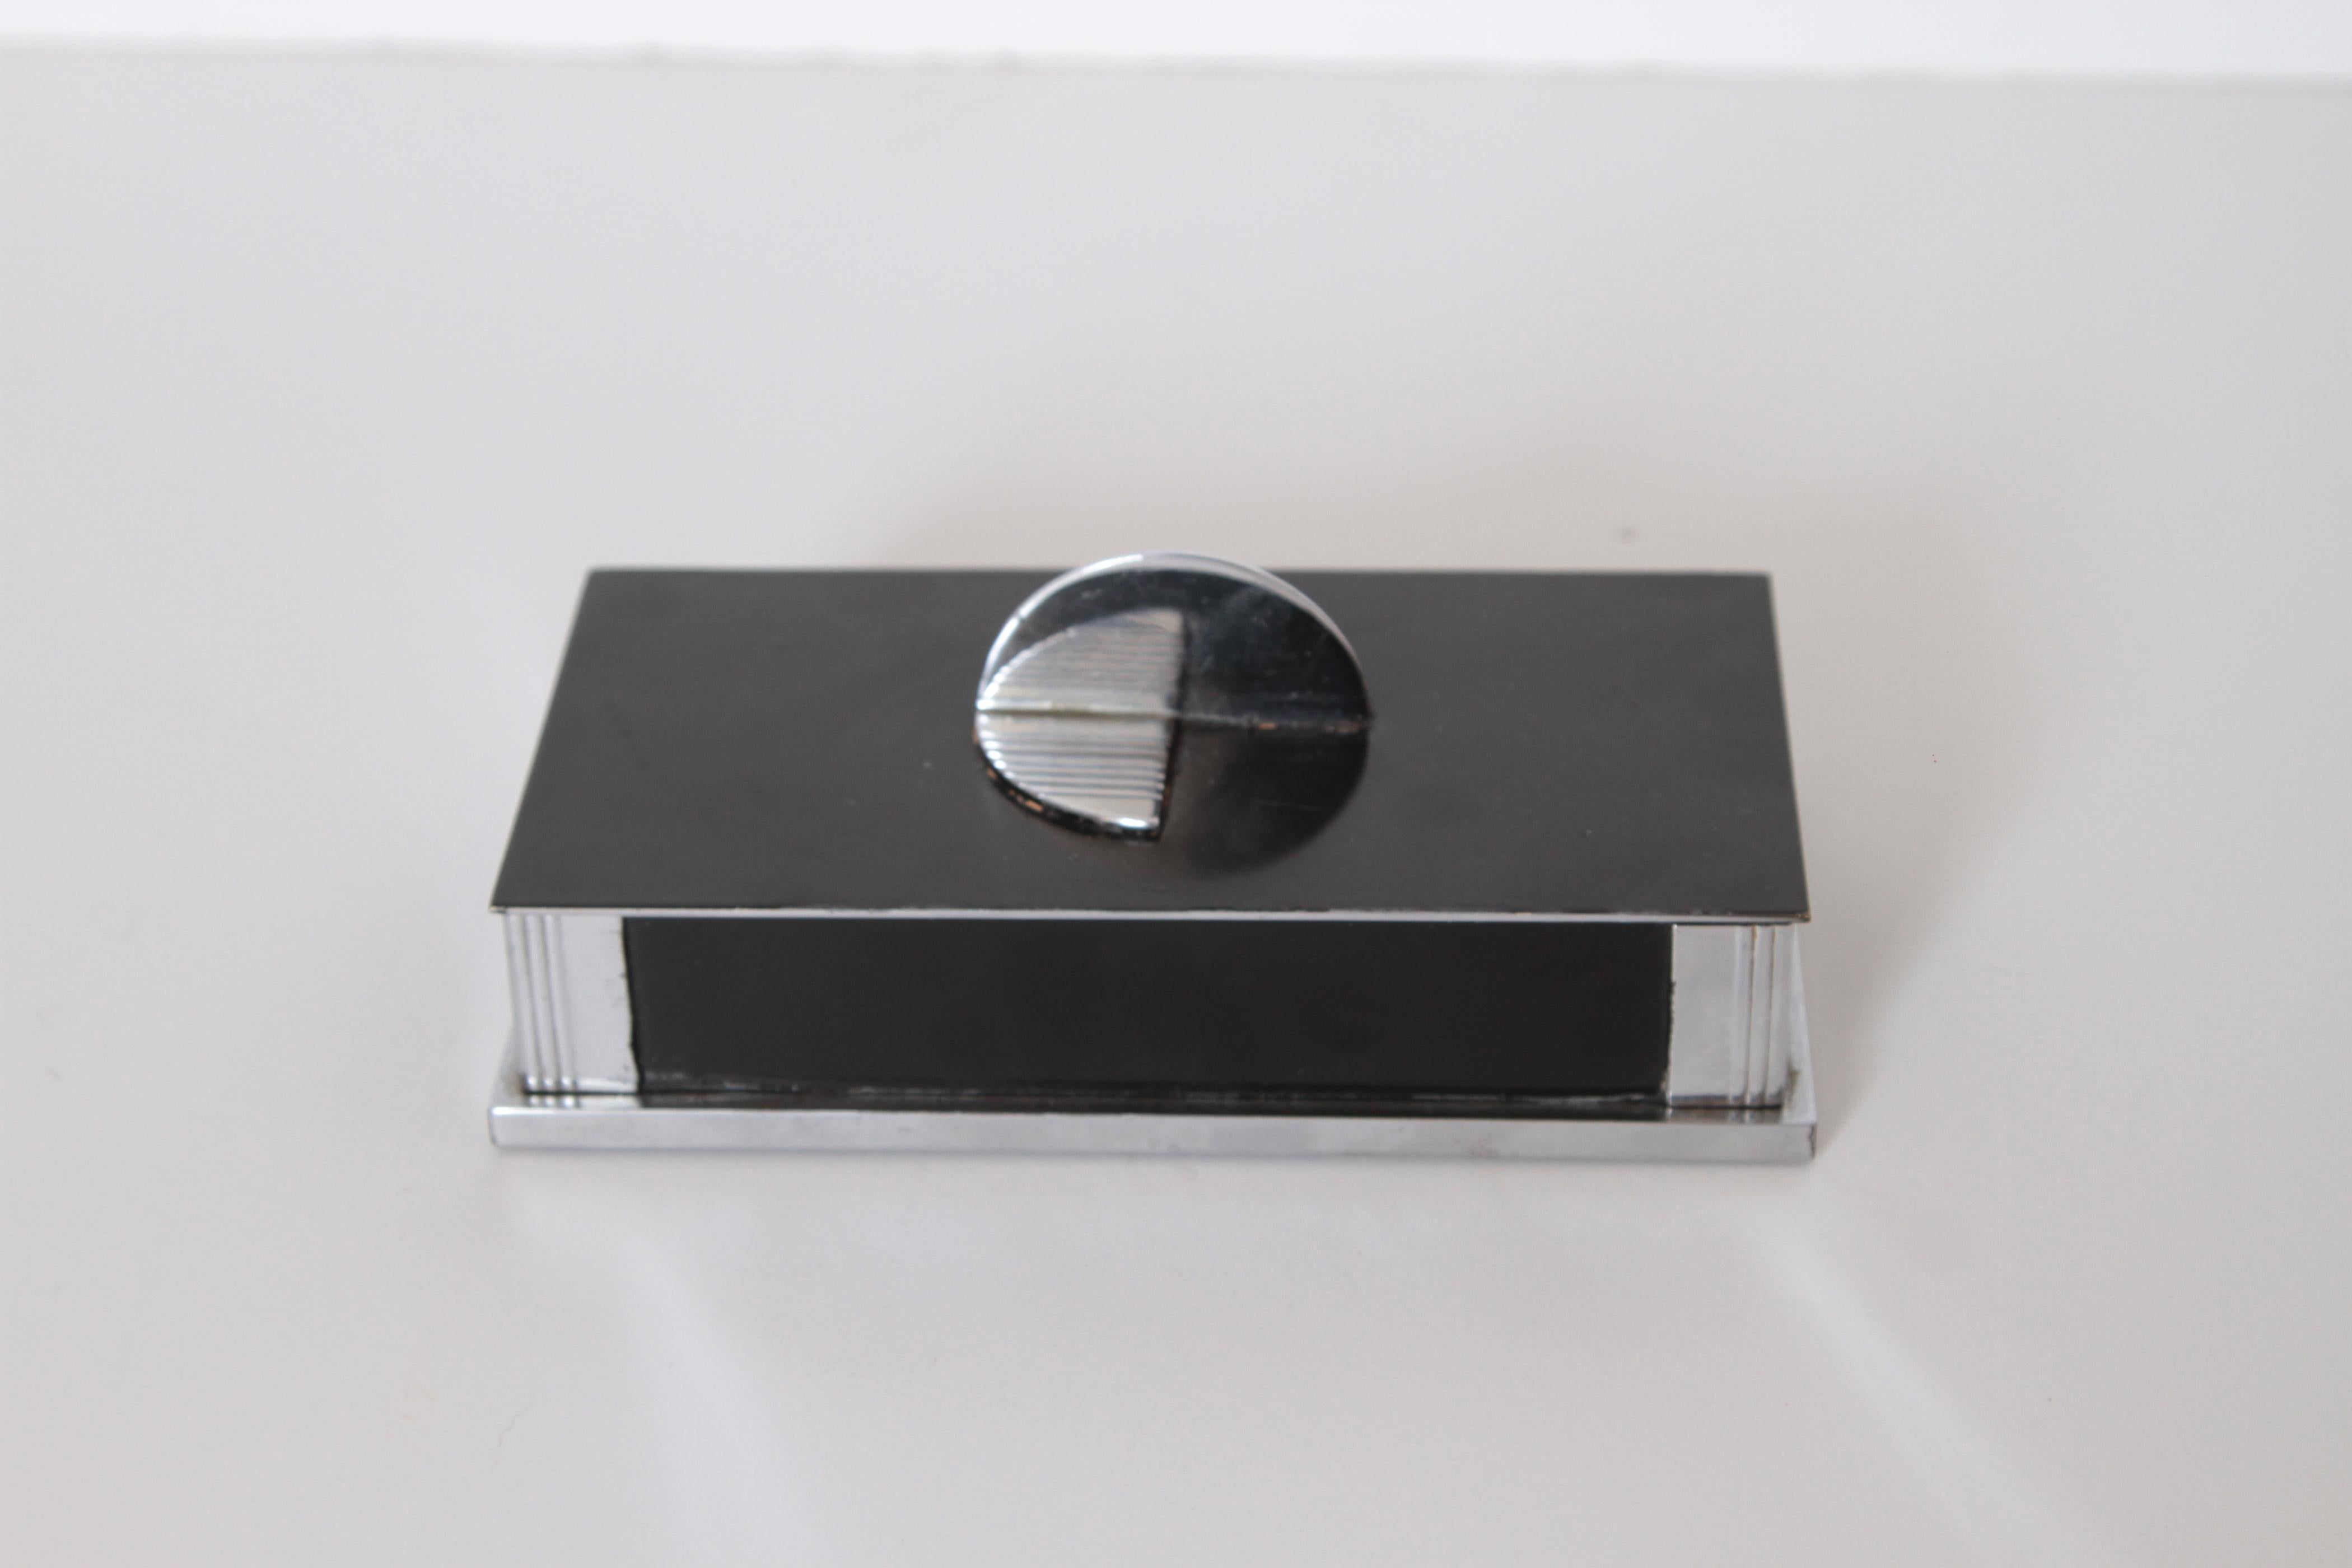 Machine Age Art Deco cubist hinged box in chrome / black enamel, Cedar, lined.
Nicely designed vintage cigarette, jewelry or occasional box. Signed LaPierre 1237
appealing form similar to some of the early Ronson Designs. Incised lines to several